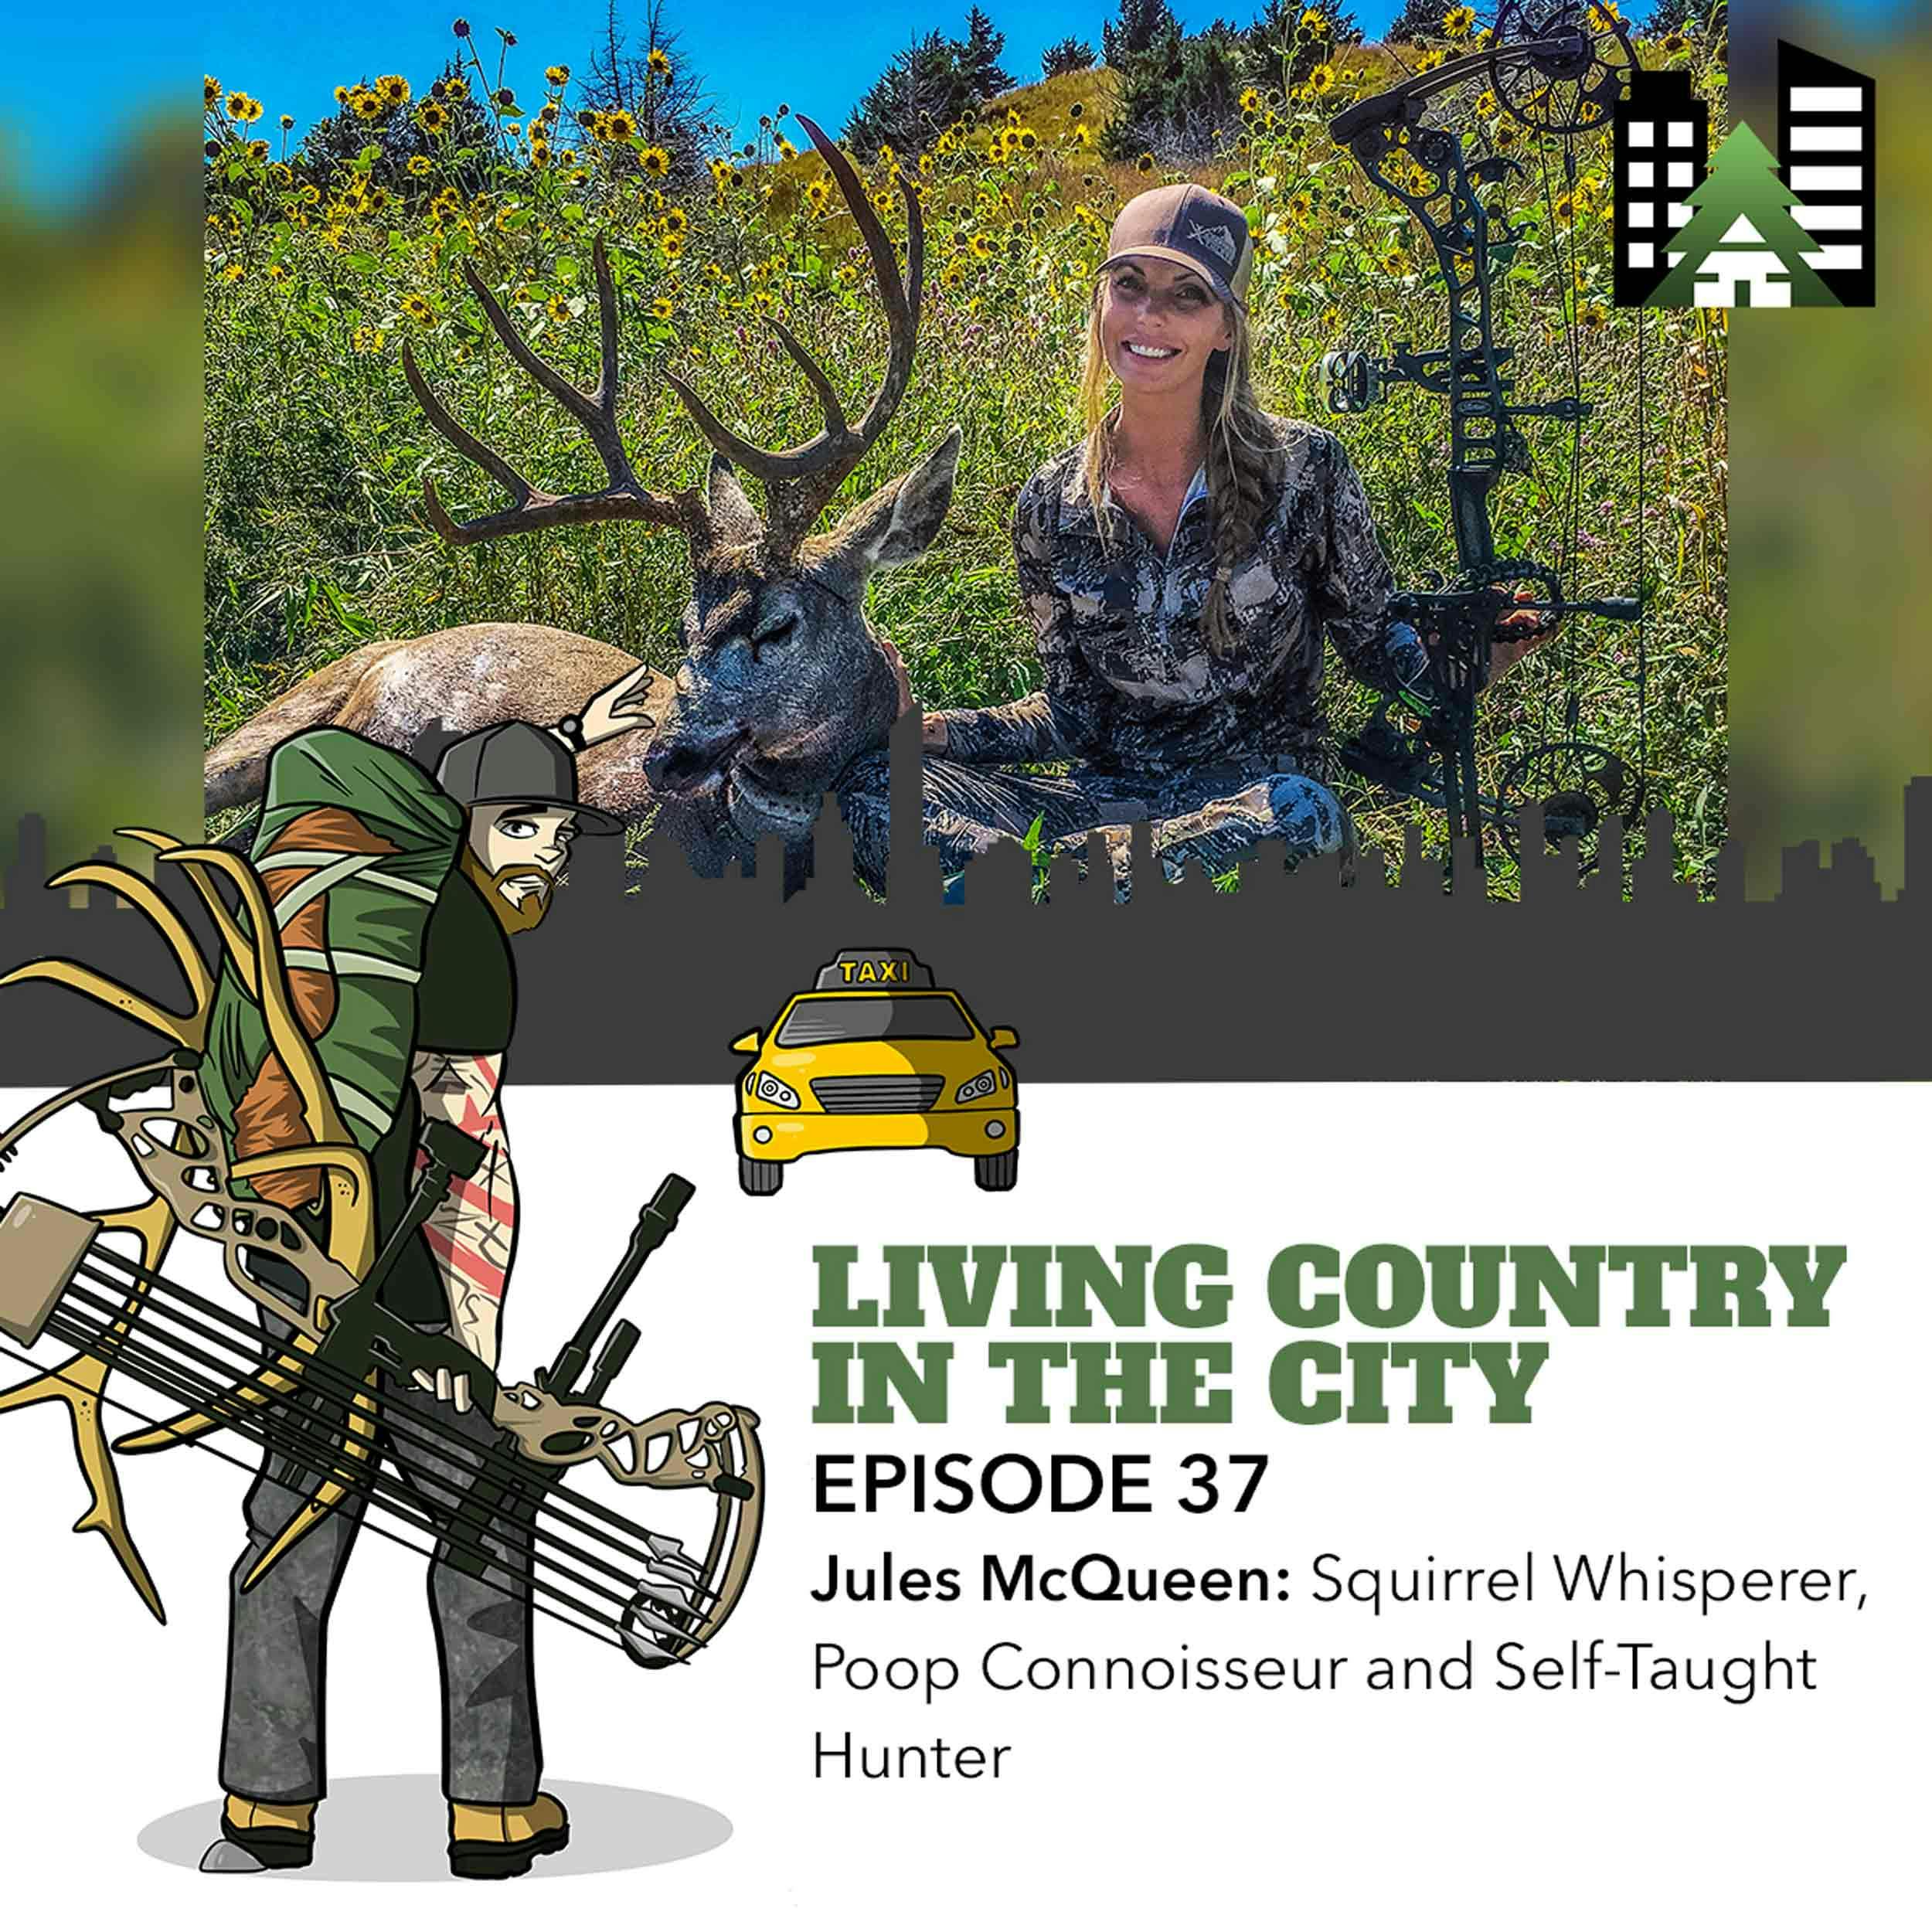 Ep 37 - Jules McQueen: Squirrel Whisperer, Poop Connoisseur and Self-Taught Hunter